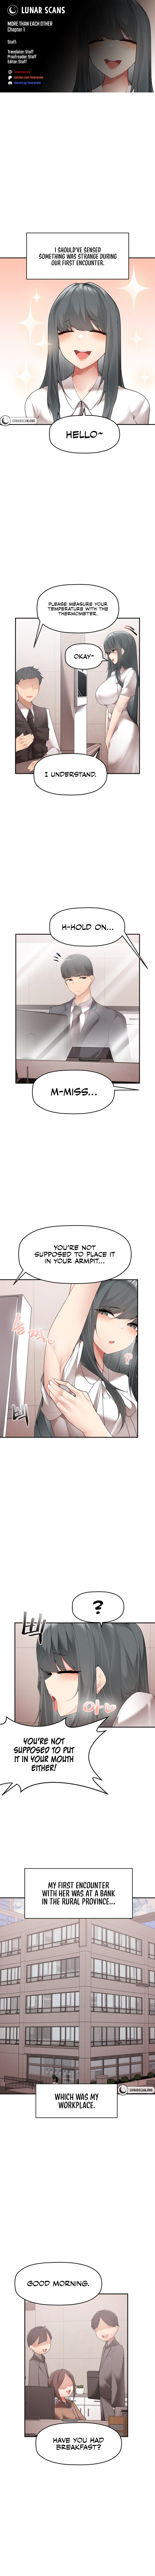 Panel Image 1 for chapter 1 of manhwa More Than Each Other on read.oppai.stream